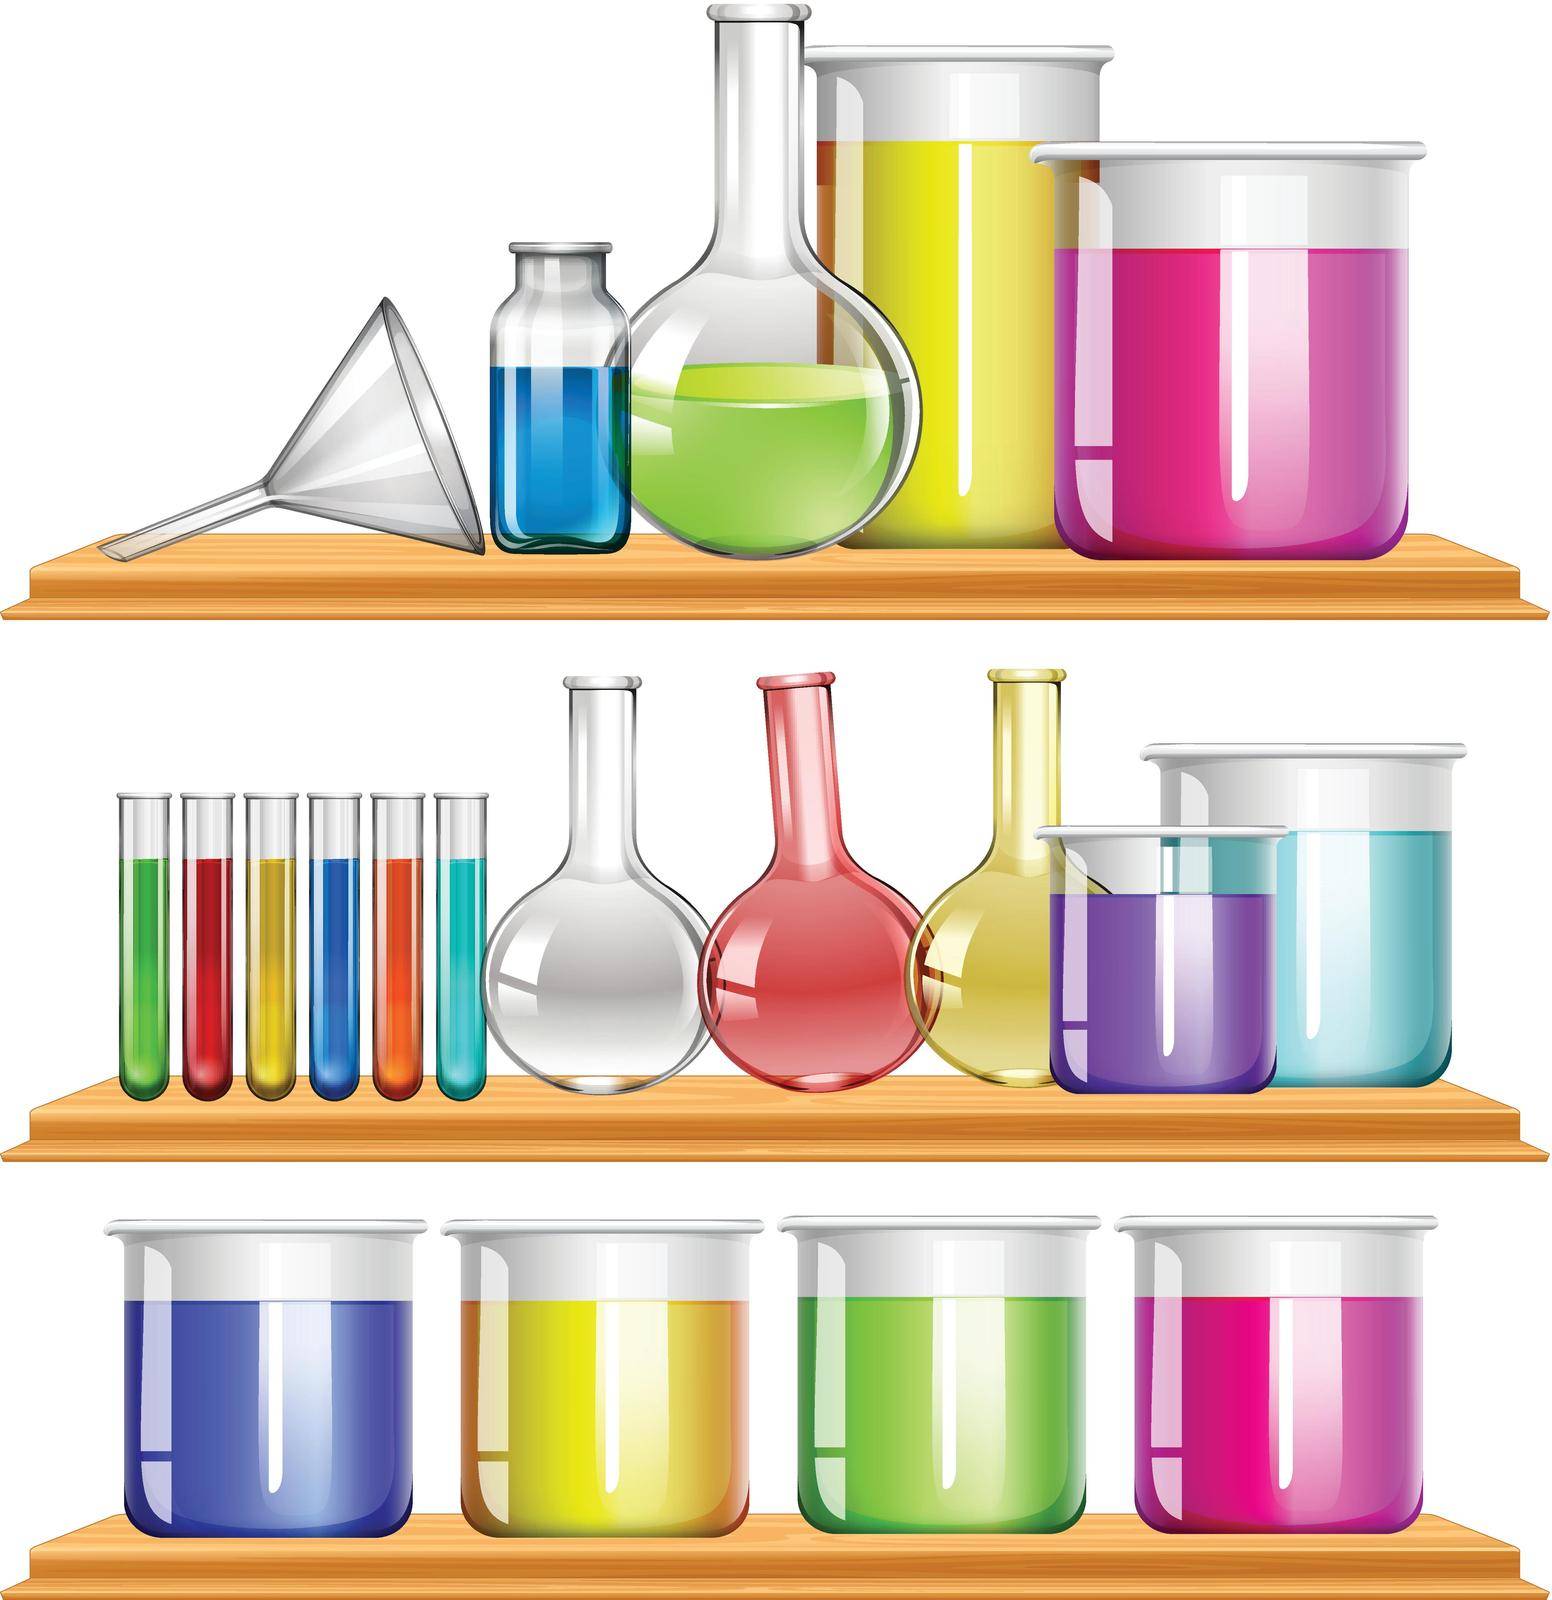 Lab equipment filled with chemical by iimages